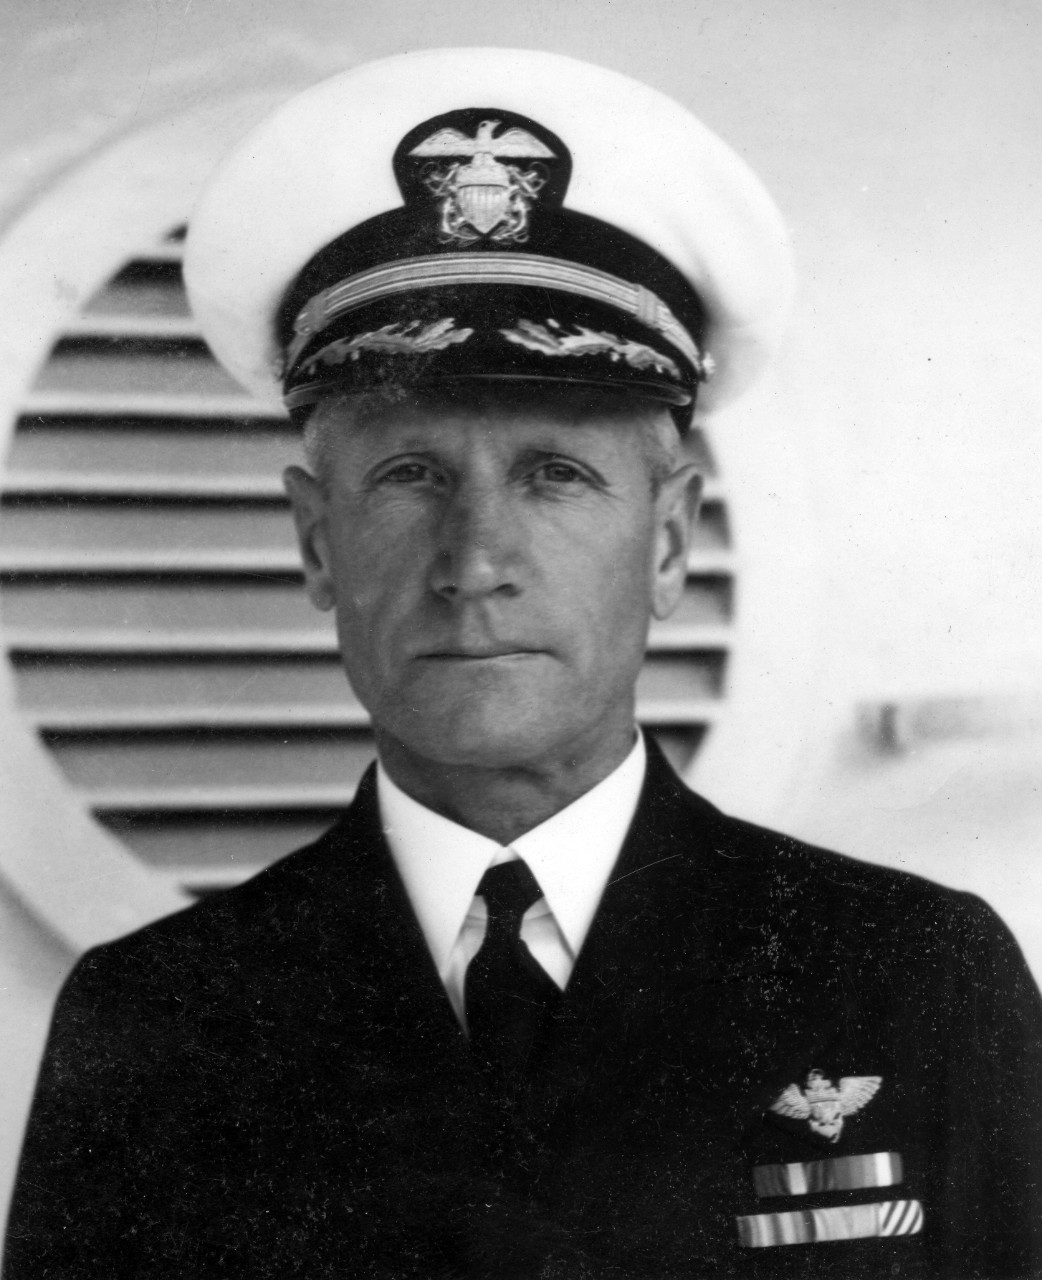 Collection of approximately 60 photographs related to Admiral Albert Cushing Read, the majority of which are from later in his career, prior to his retirement in 1946. The images include social events, tours, ceremonies, and group photos. Several early career photos include Read as a lieutenant and commander, including an early photo as young aviator. The collection also consists of many newspaper articles as well as personal letters and official naval records. 